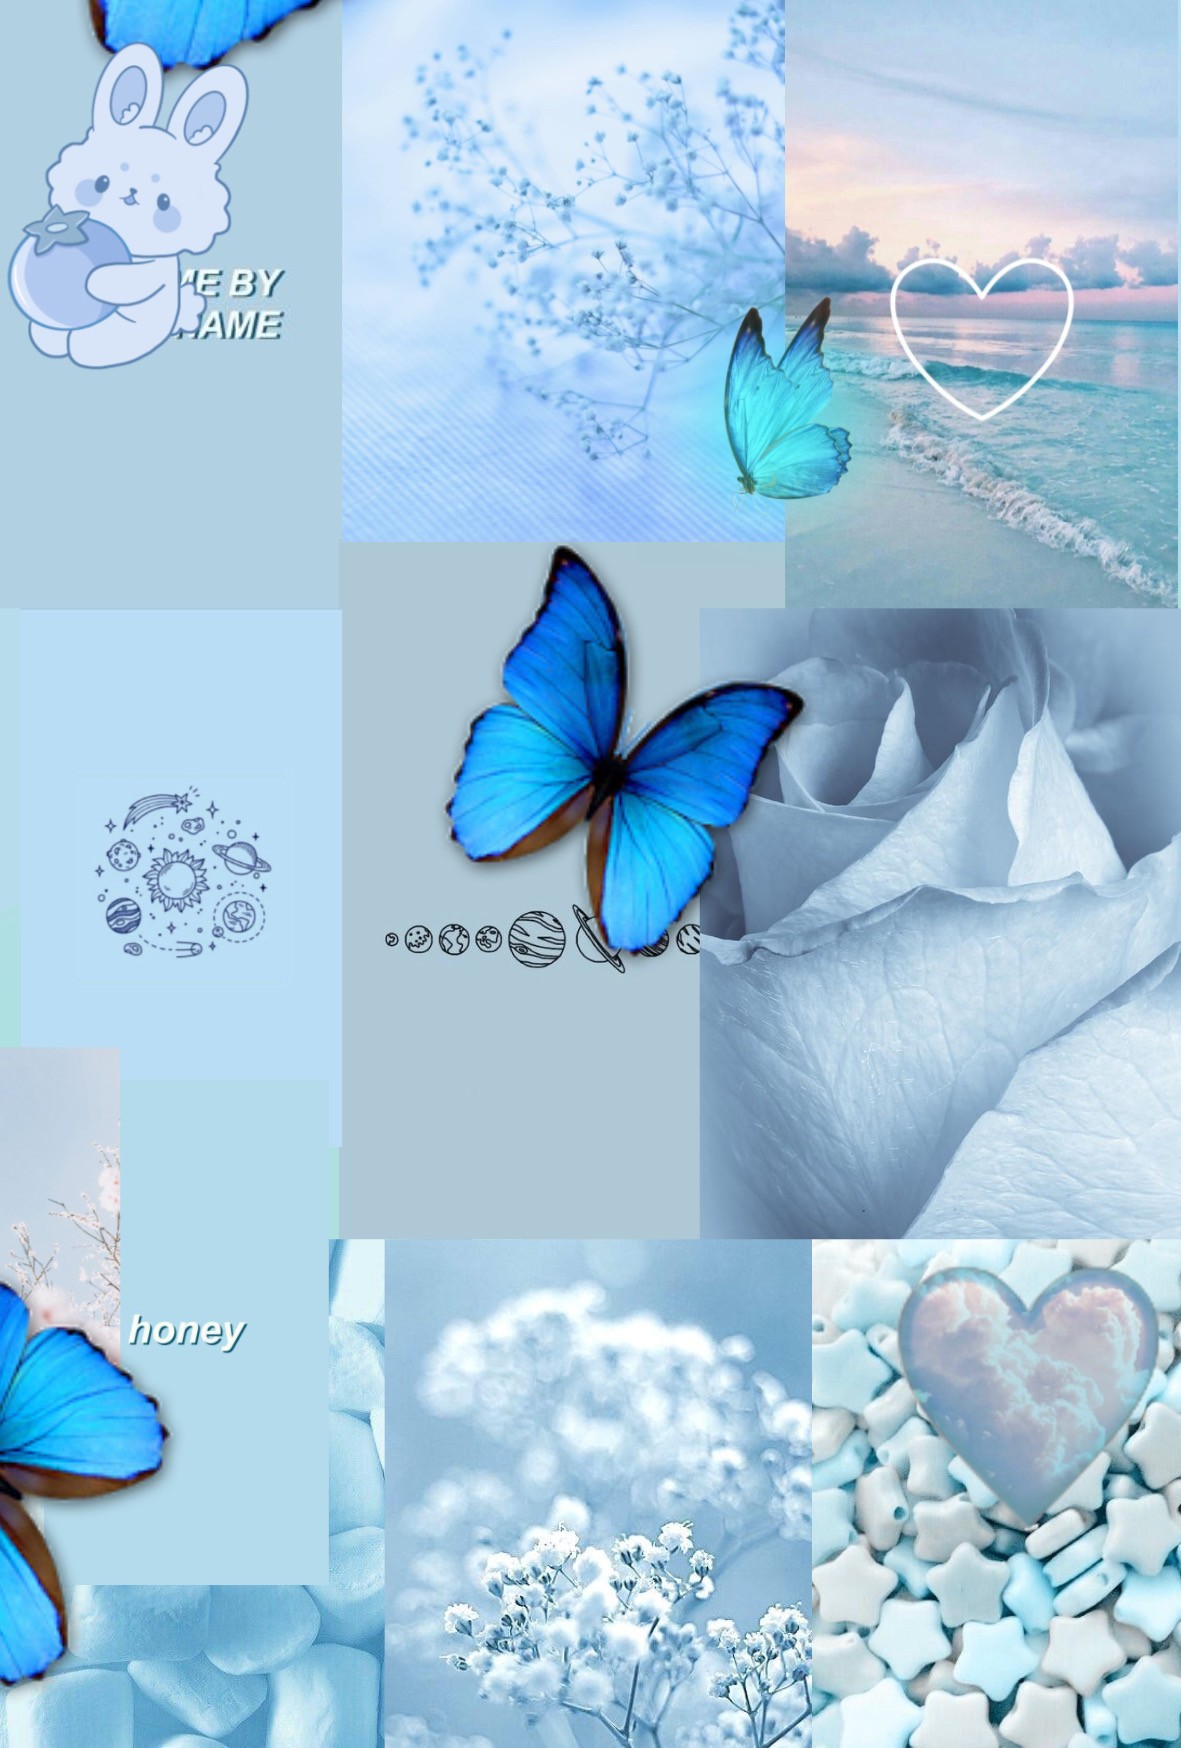 Cute Blue Aesthetic Wallpapers